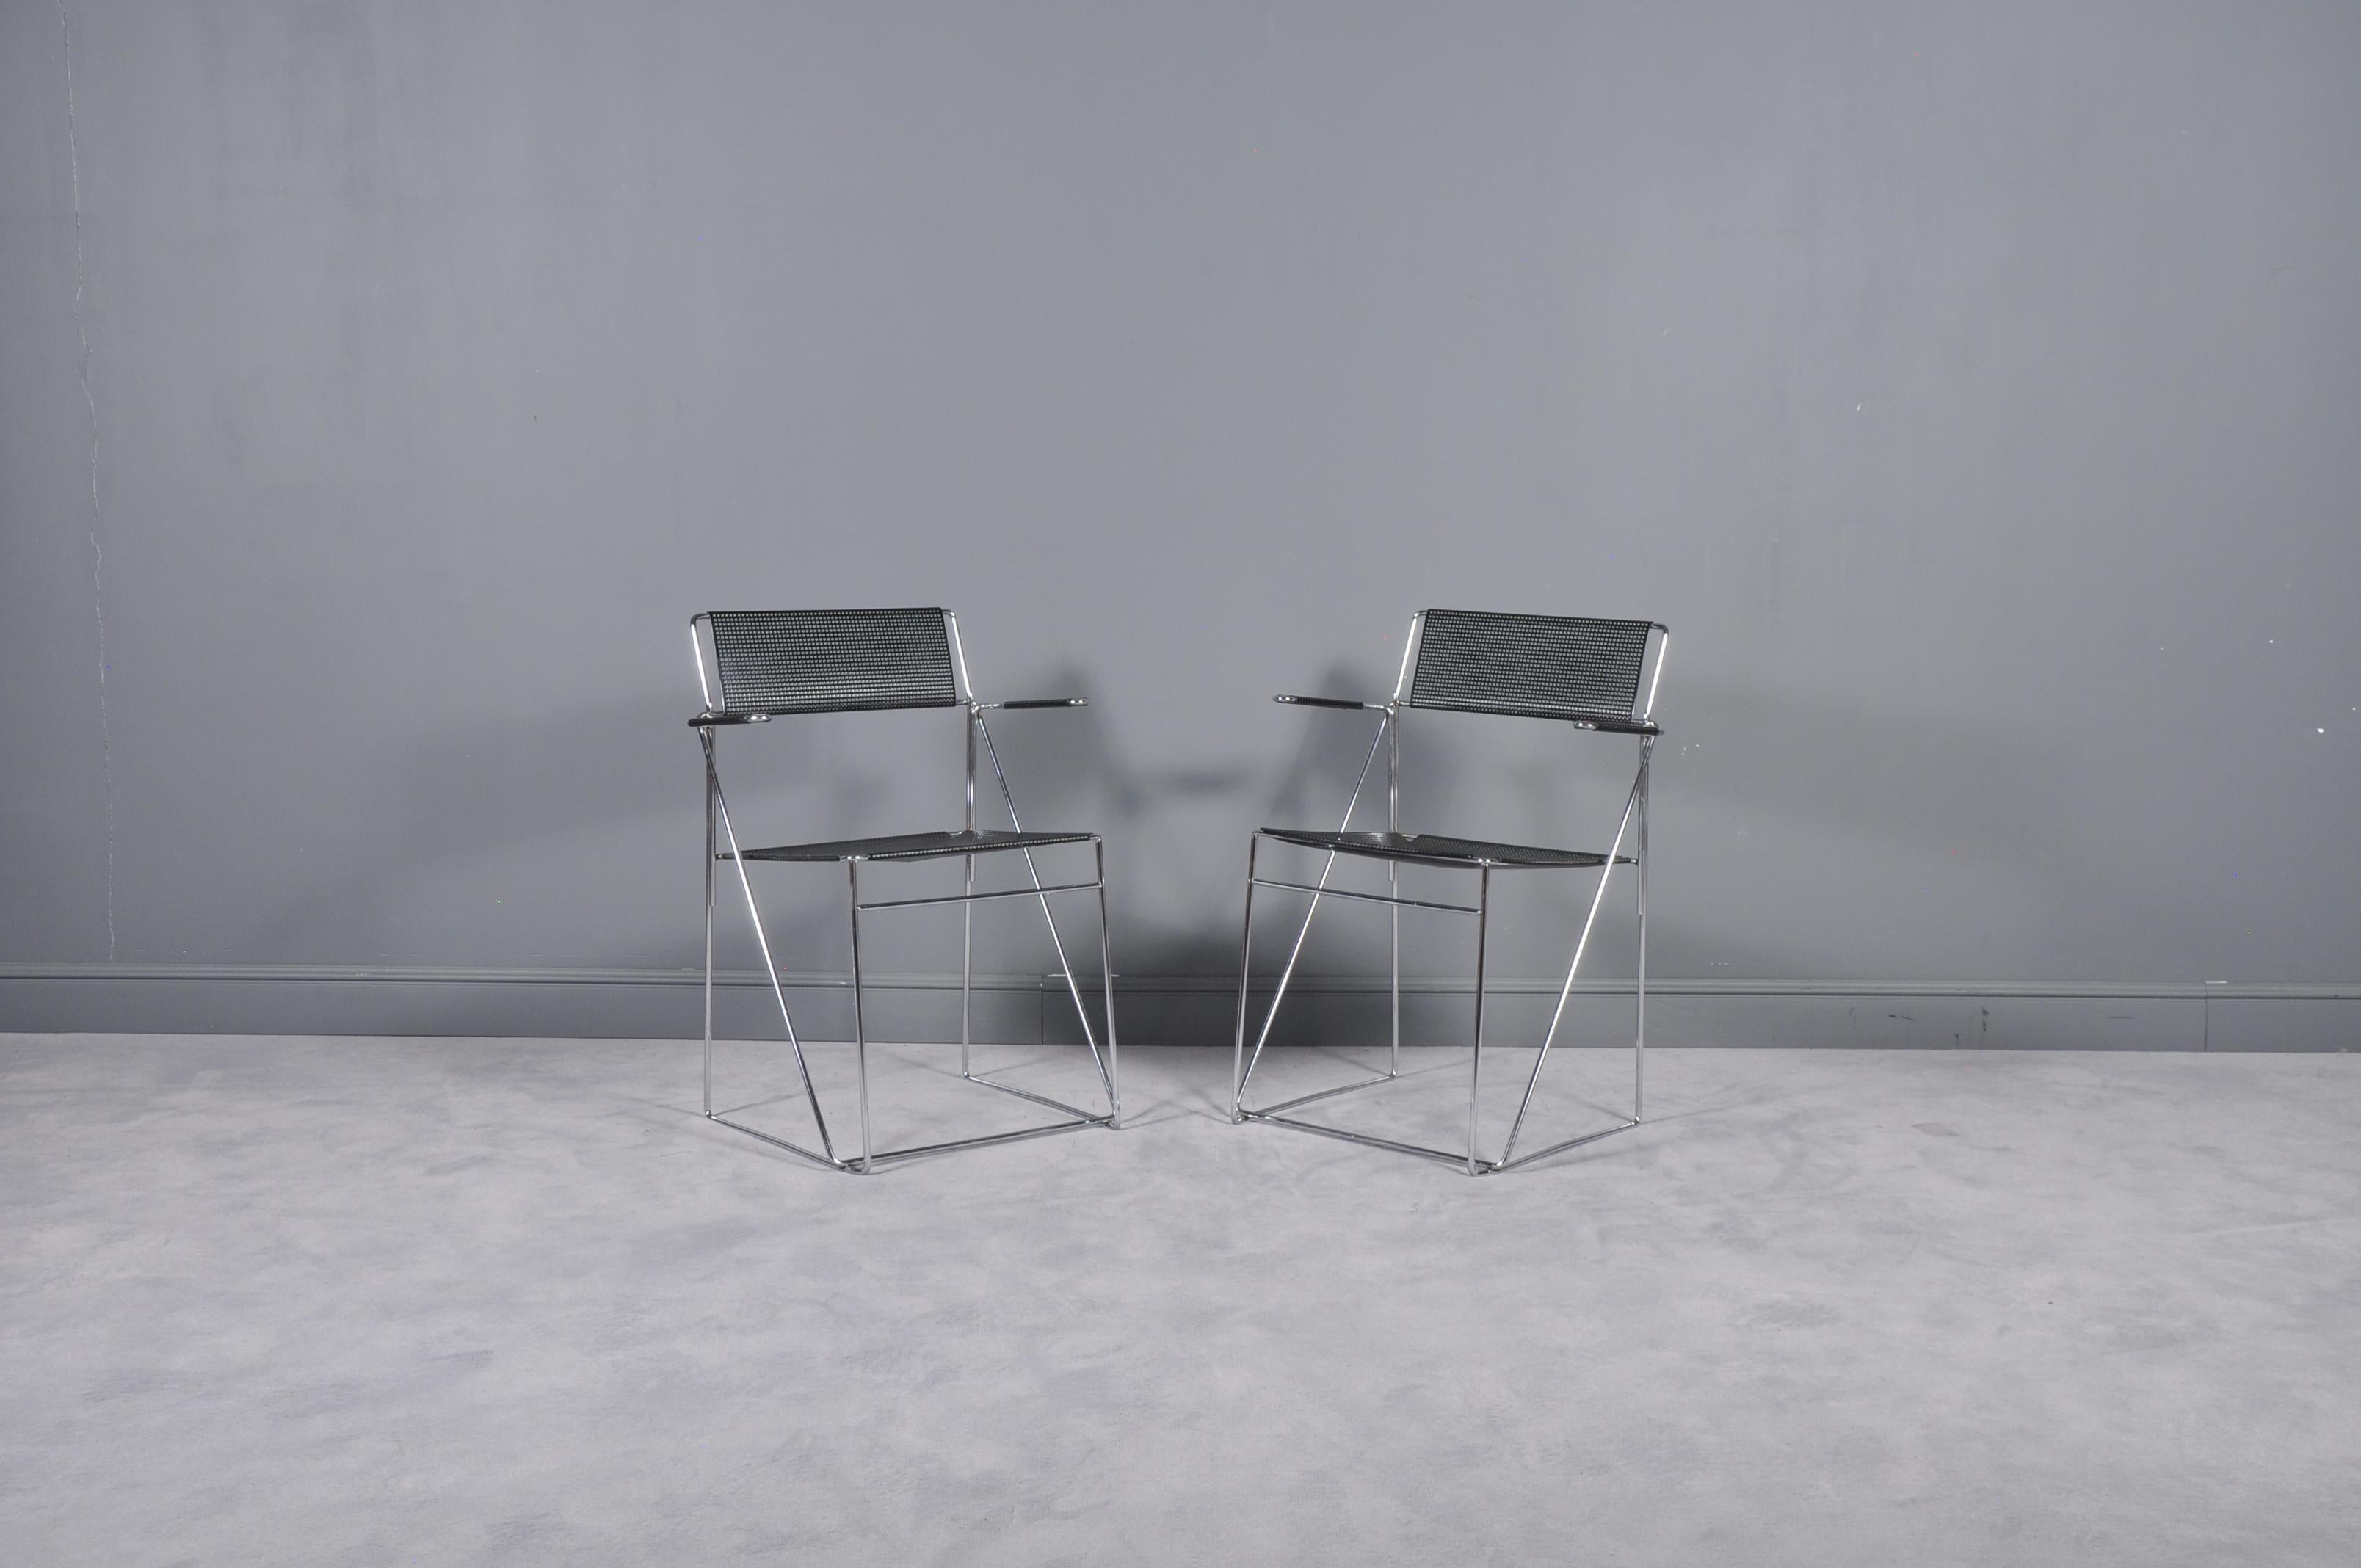 - Pair of Hybodan stacking chairs
- By Niels Jorgen Haugesen from the 1970s
- Frame in chromed steel
- Backrest and seat in enamelled perforated steel.